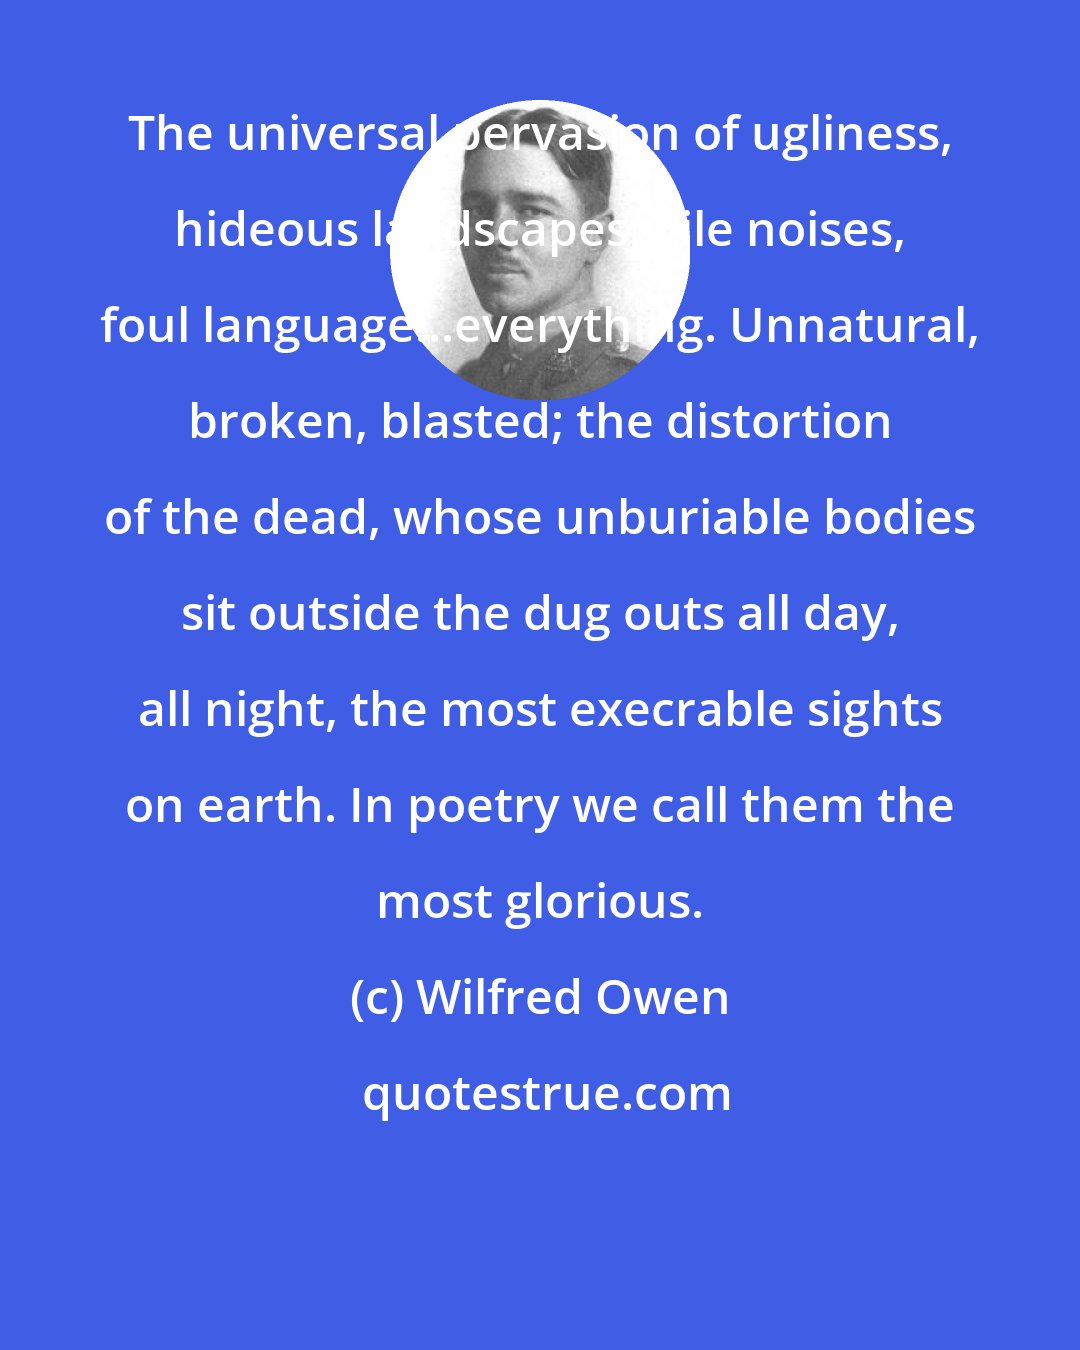 Wilfred Owen: The universal pervasion of ugliness, hideous landscapes, vile noises, foul language...everything. Unnatural, broken, blasted; the distortion of the dead, whose unburiable bodies sit outside the dug outs all day, all night, the most execrable sights on earth. In poetry we call them the most glorious.